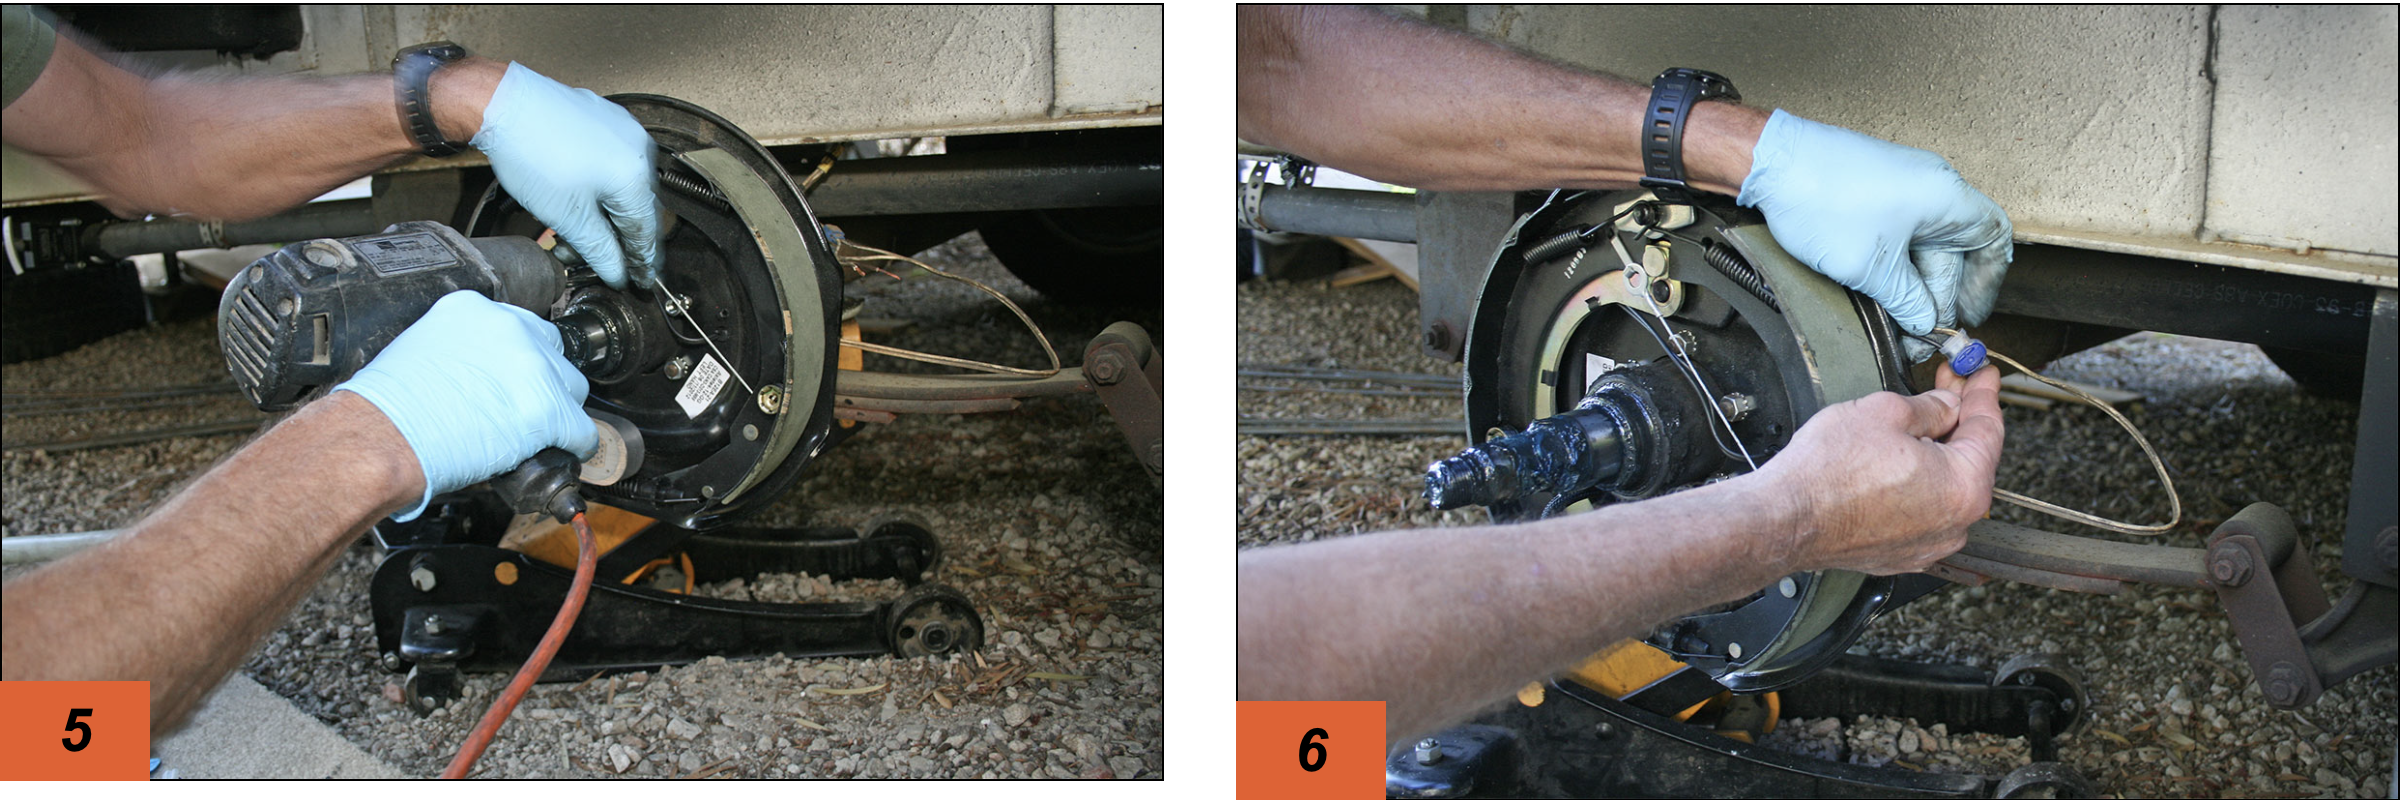 Installation of the Lippert brakes reverses the removal process